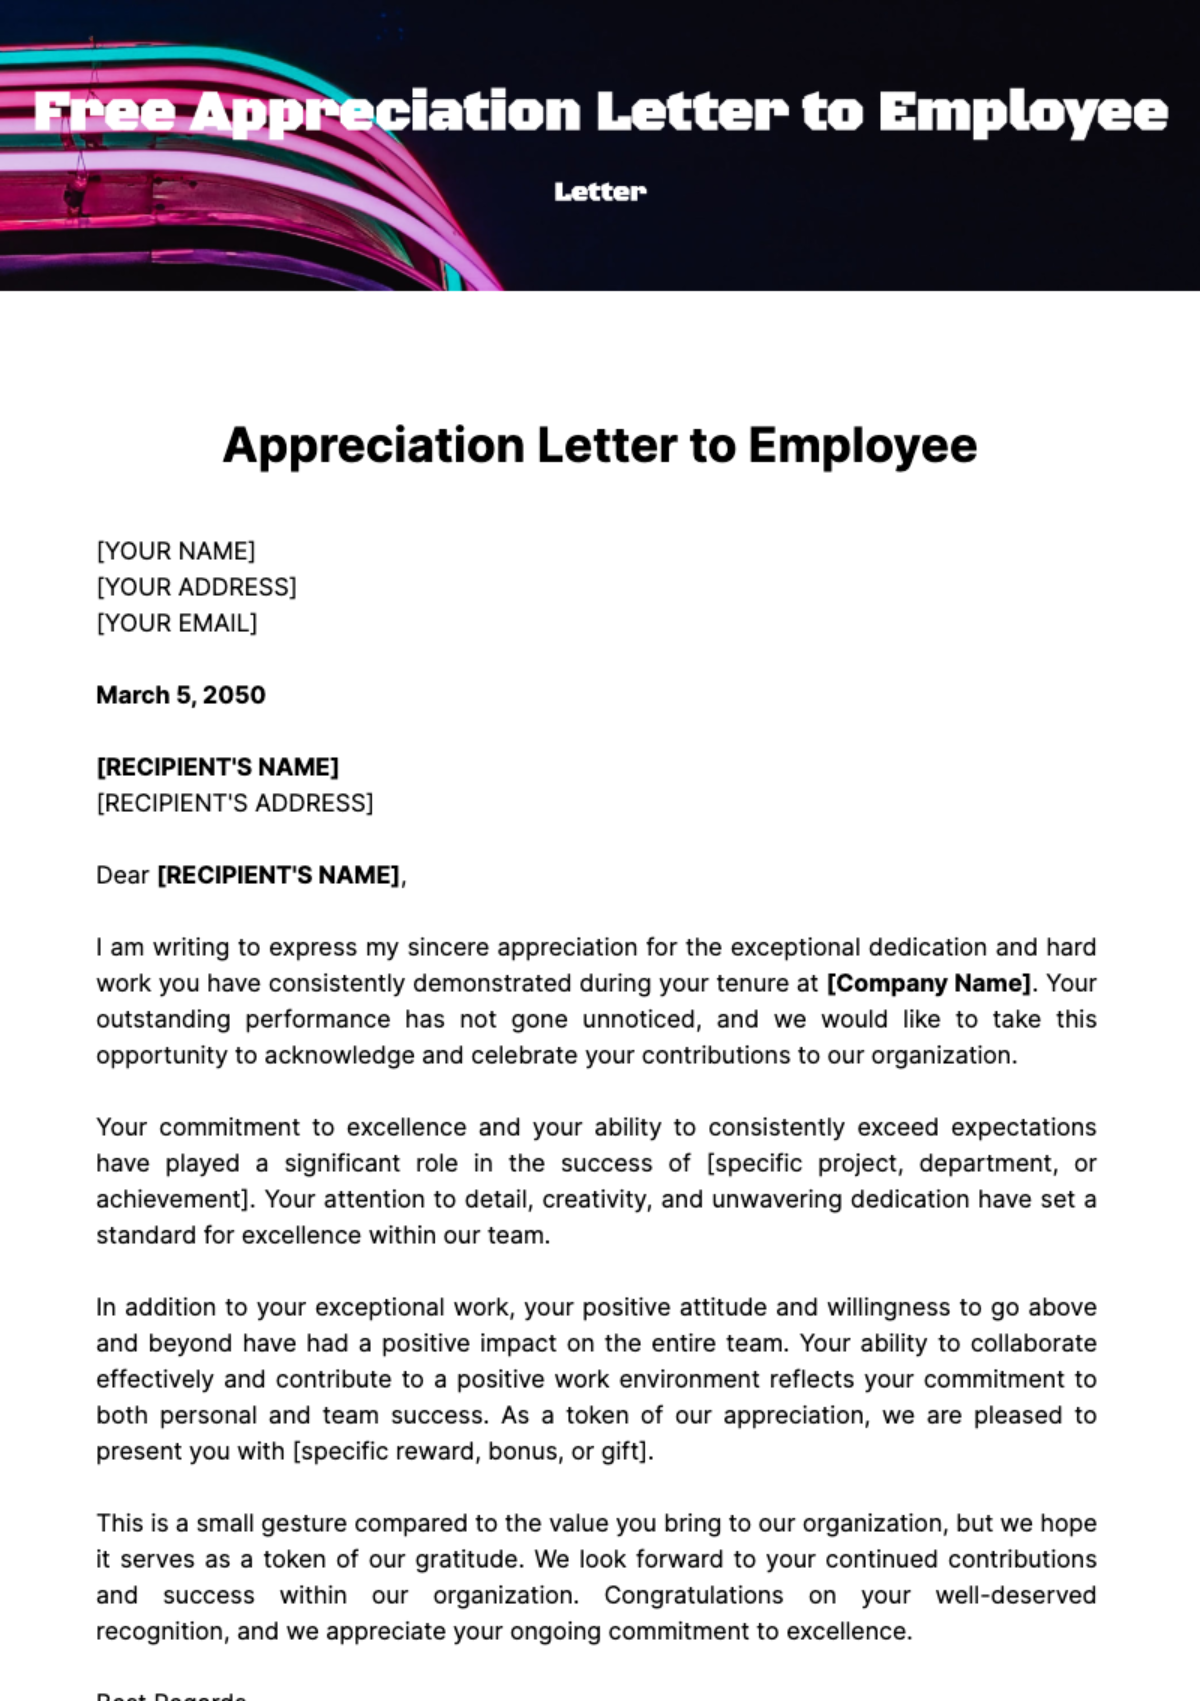 Free Appreciation Letter to Employee Template